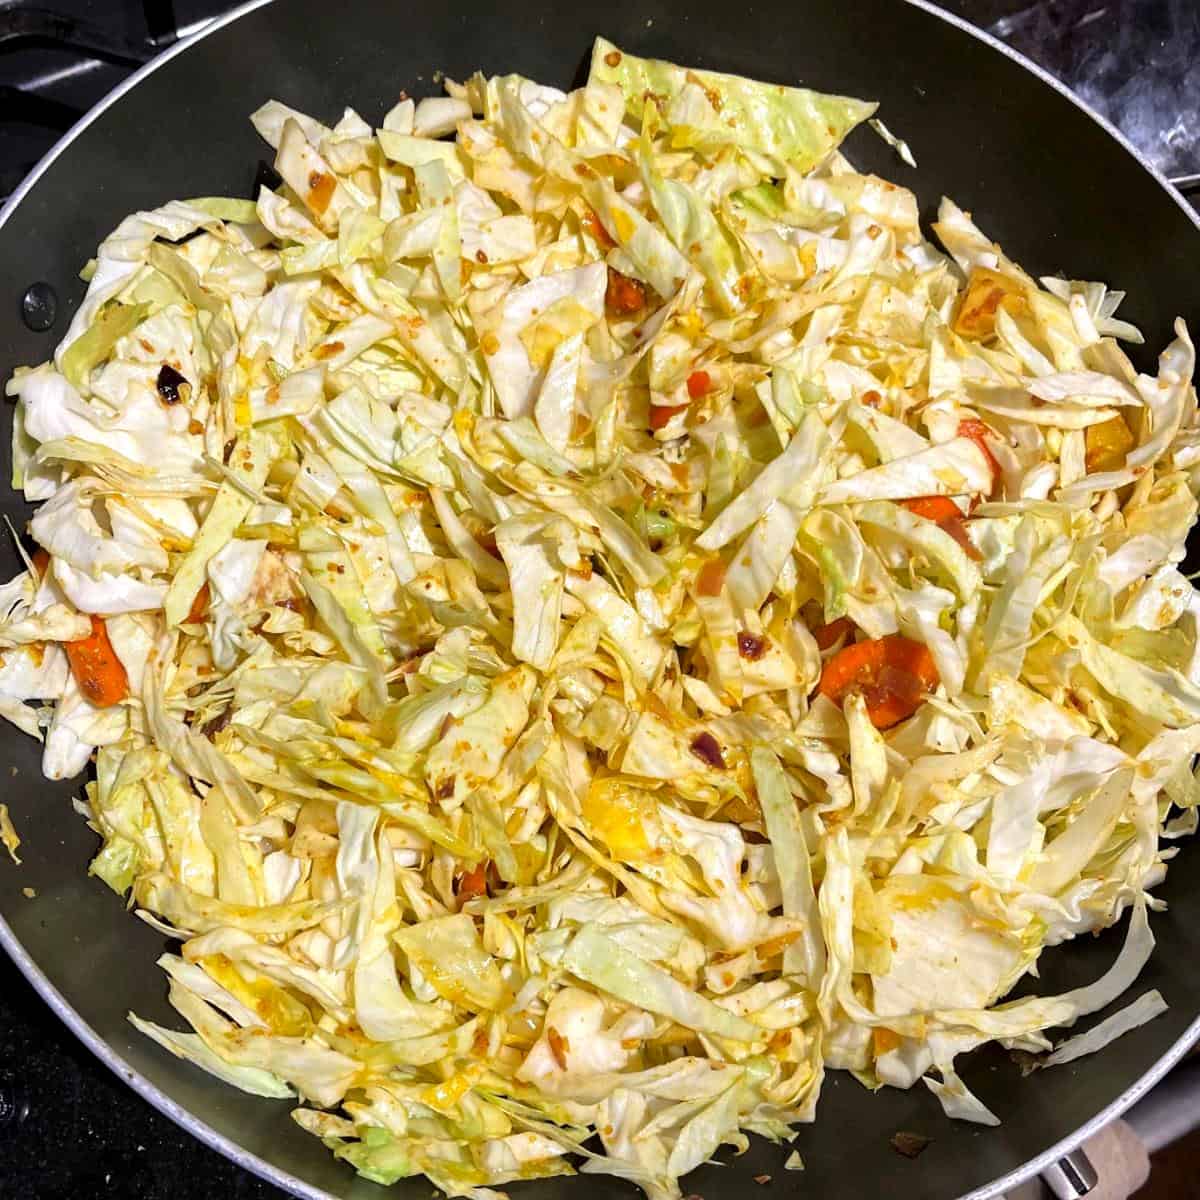 Cabbage mixed with spices in wok.